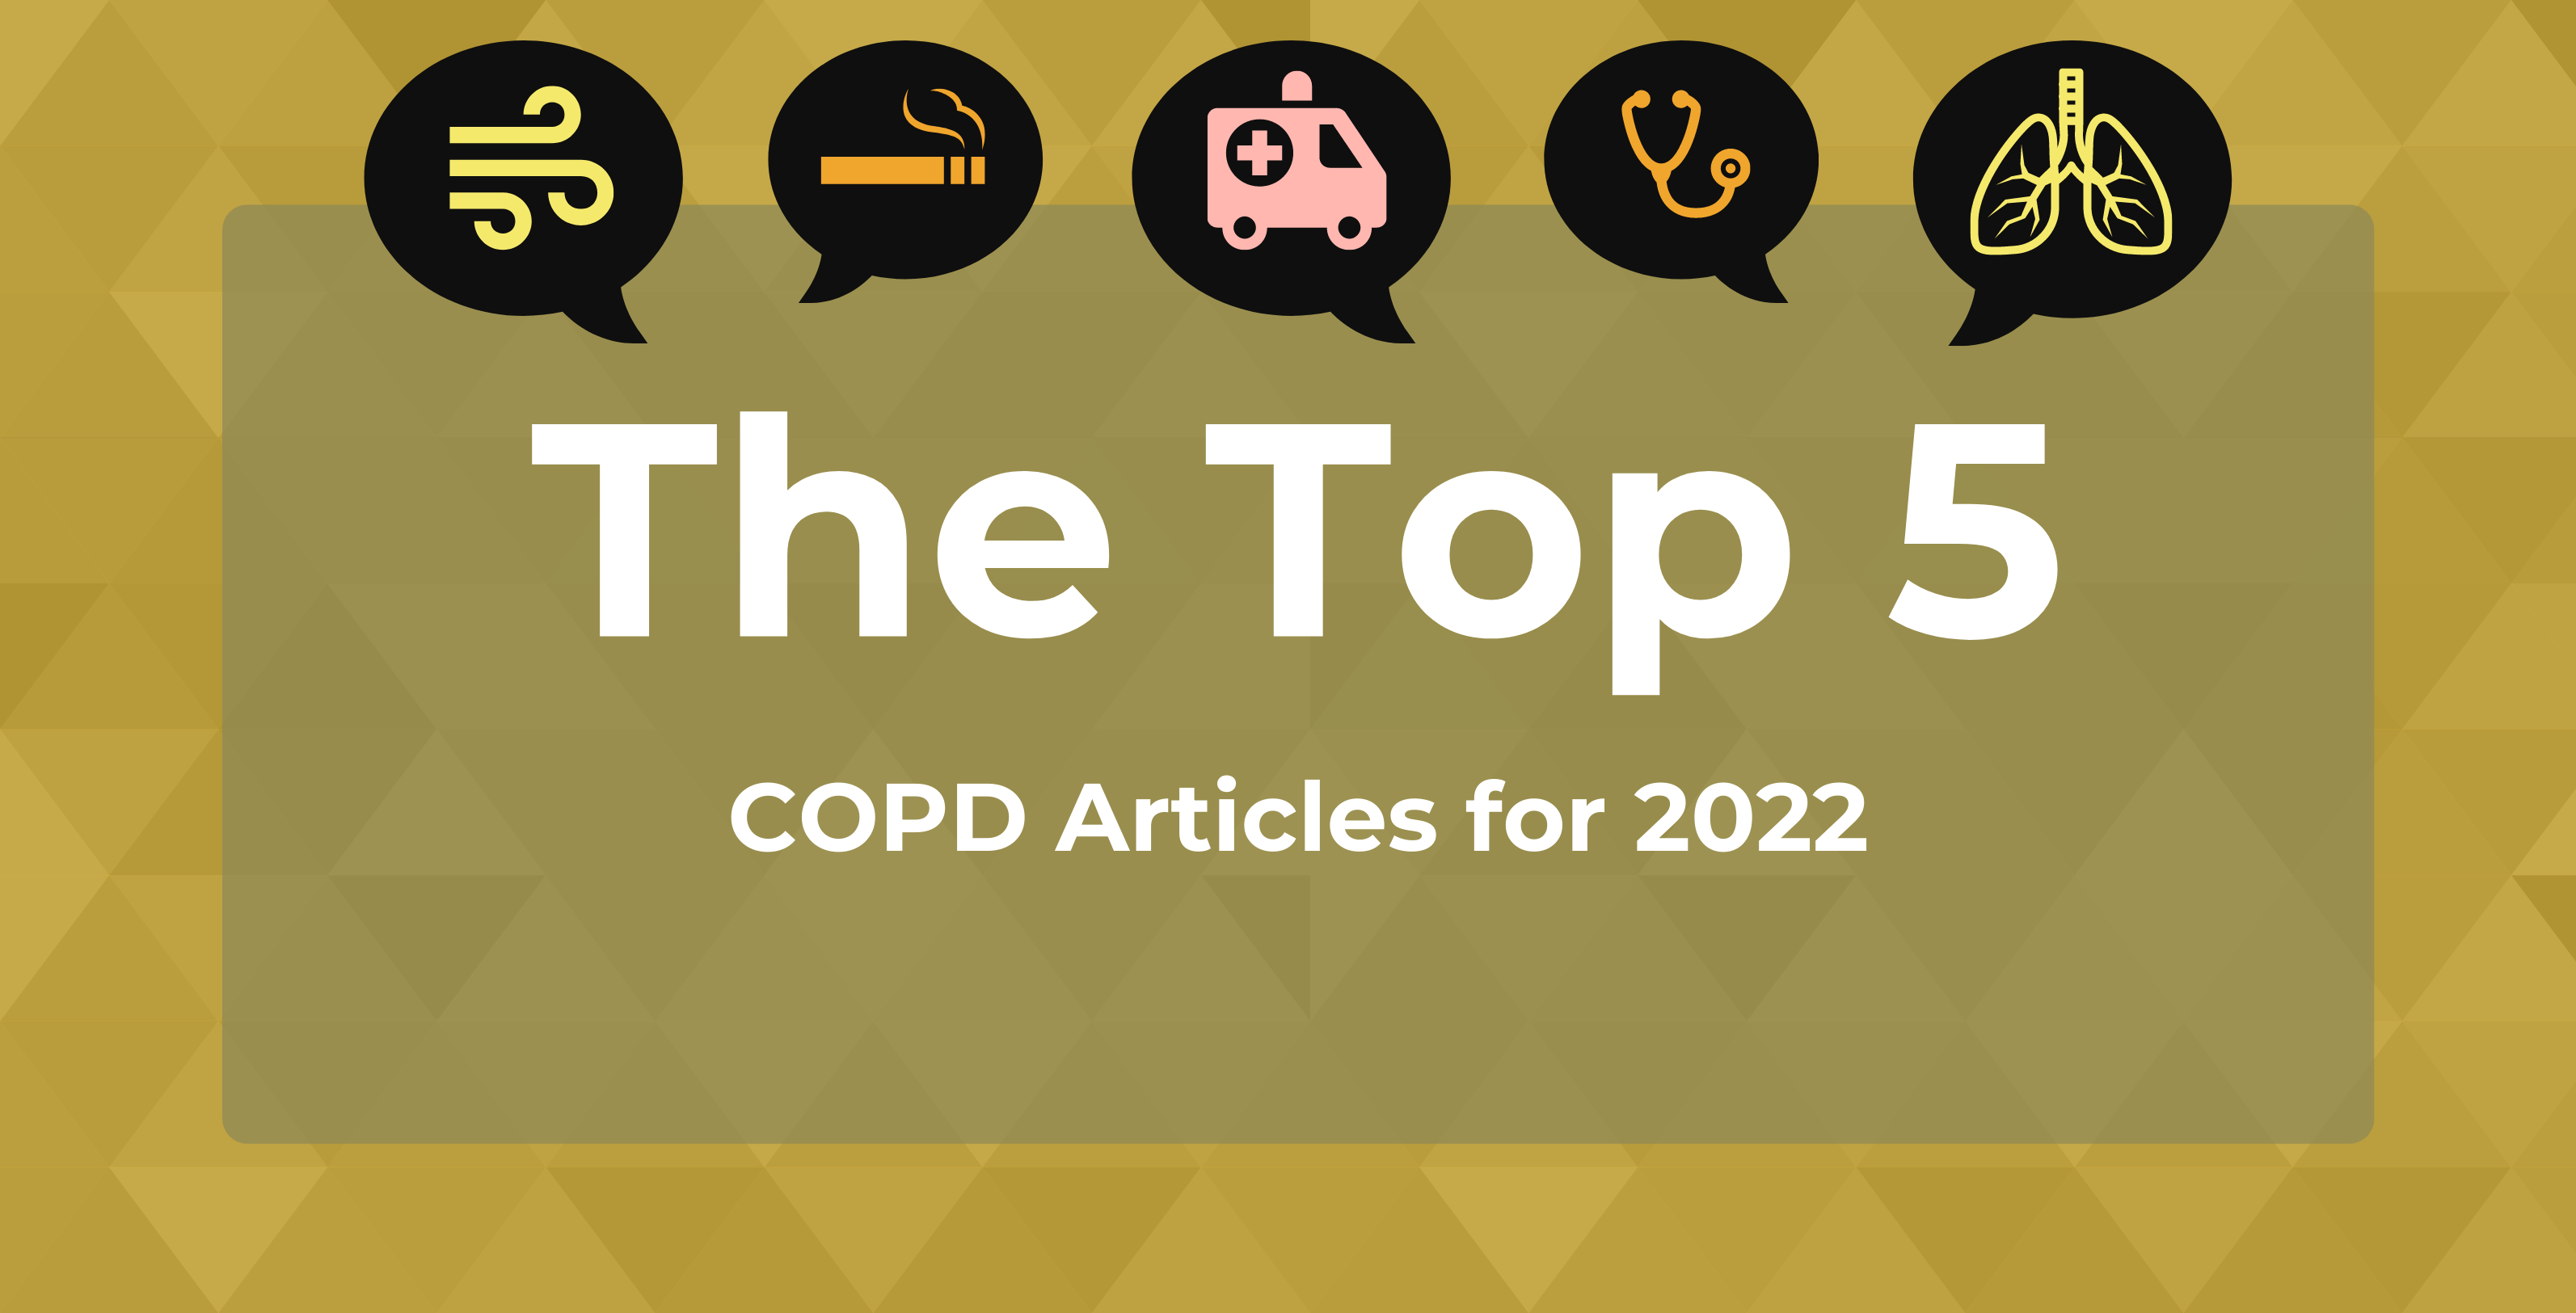 image with "The Top COPD Articles of 2022"